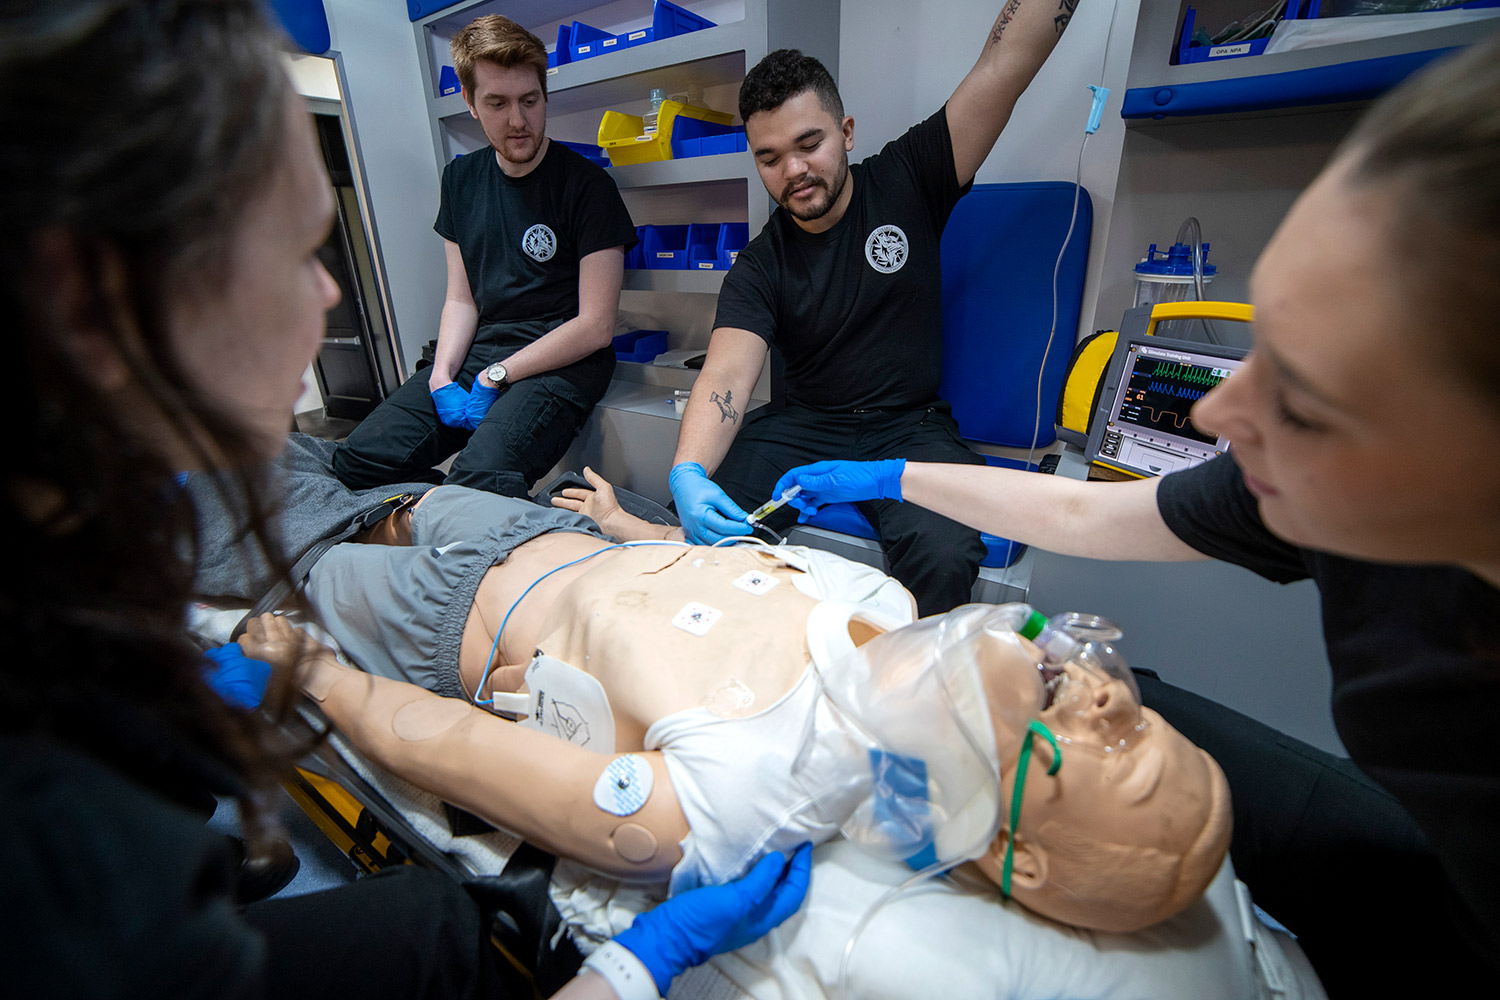 paramedic students practicing mobile intensive care